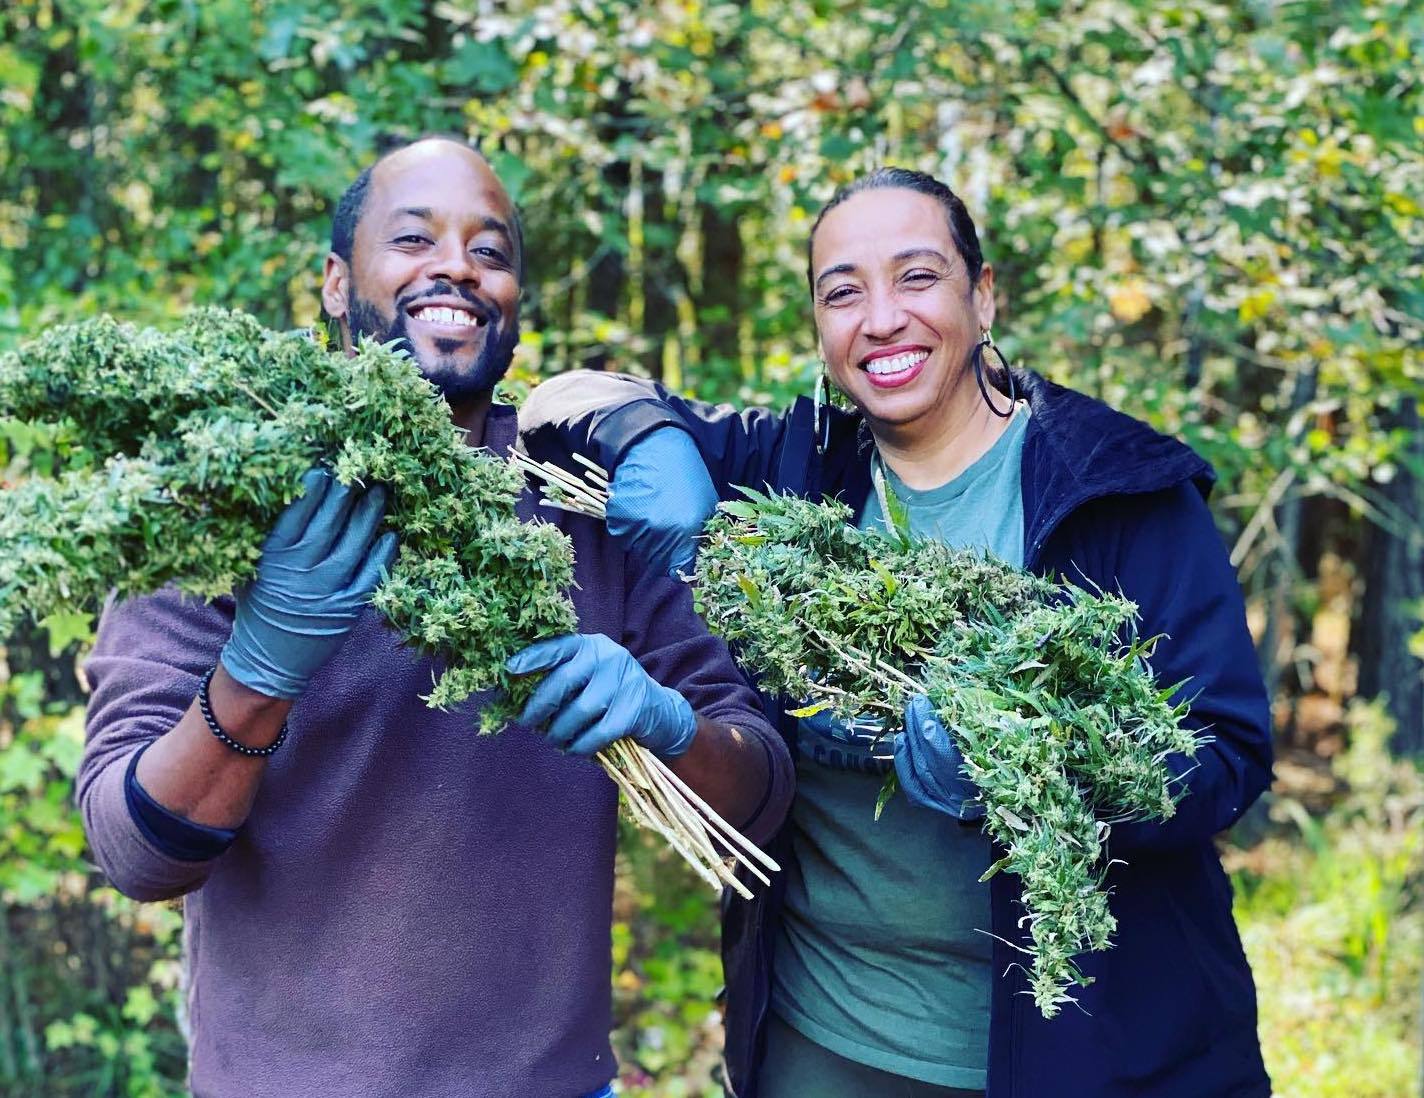 Roy Pope, left, and Mia Darden, right, holding harvested hemp at Kind Origins Pharms in Toney, Alabama. Sept. 2021